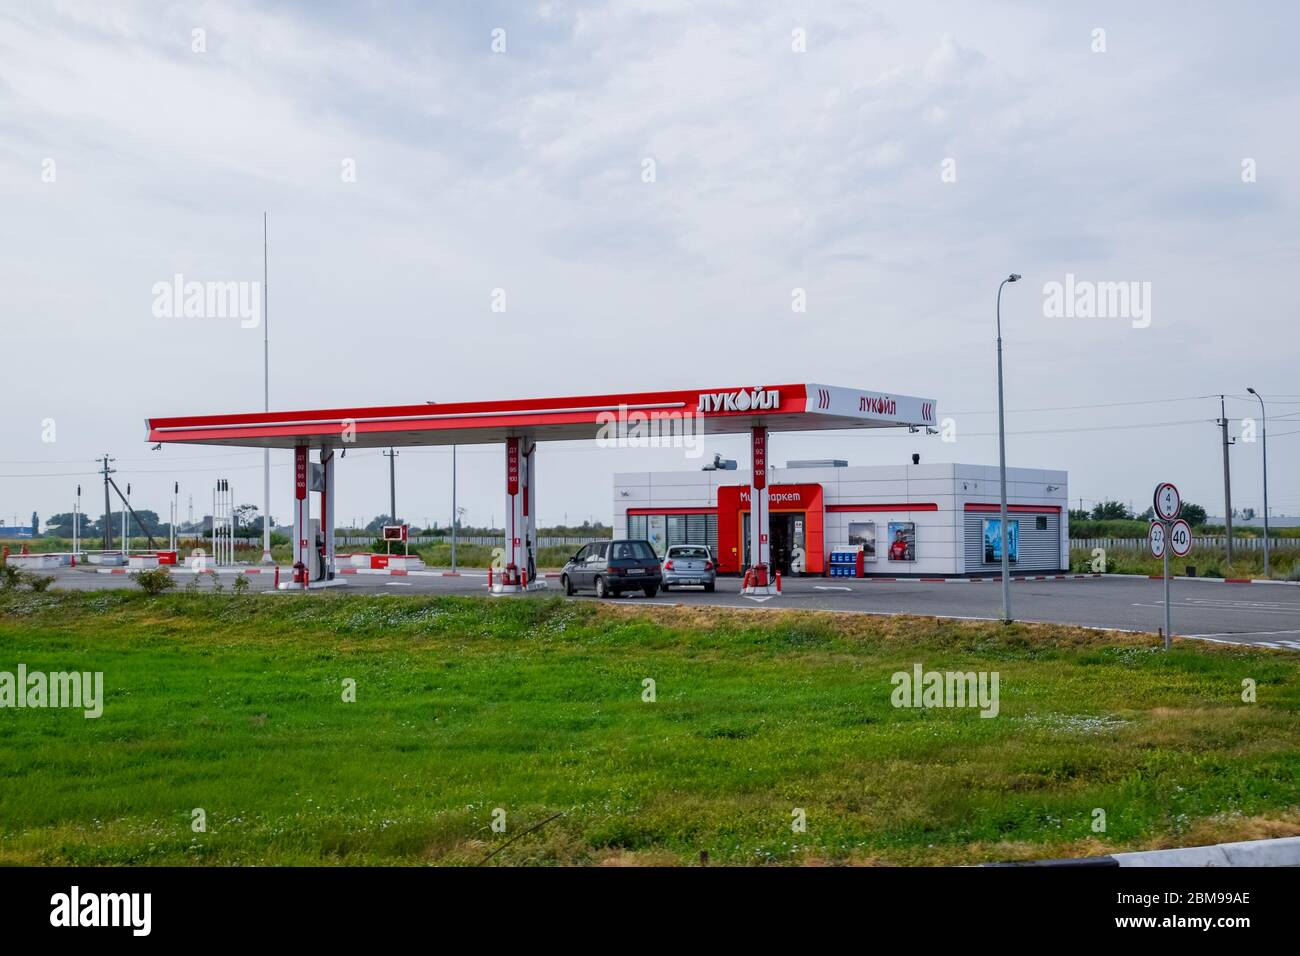 Stavropol, Russia -June 13, 2019: gas station at the gas station Lukoil. Stock Photo